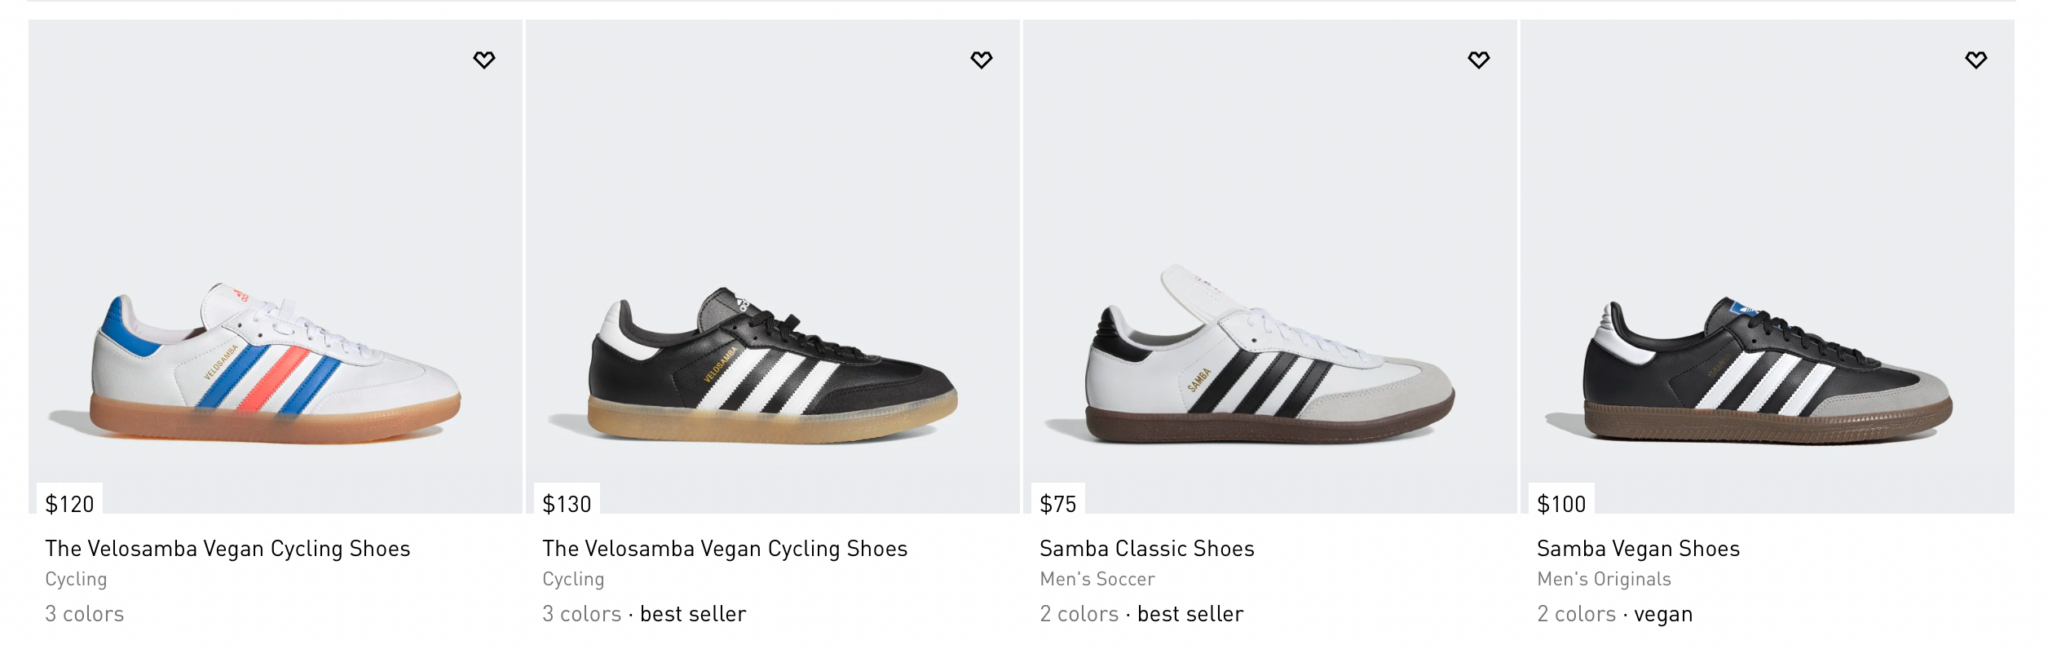 Sign Up for the Adidas Affiliate Program with Sovrn Commerce